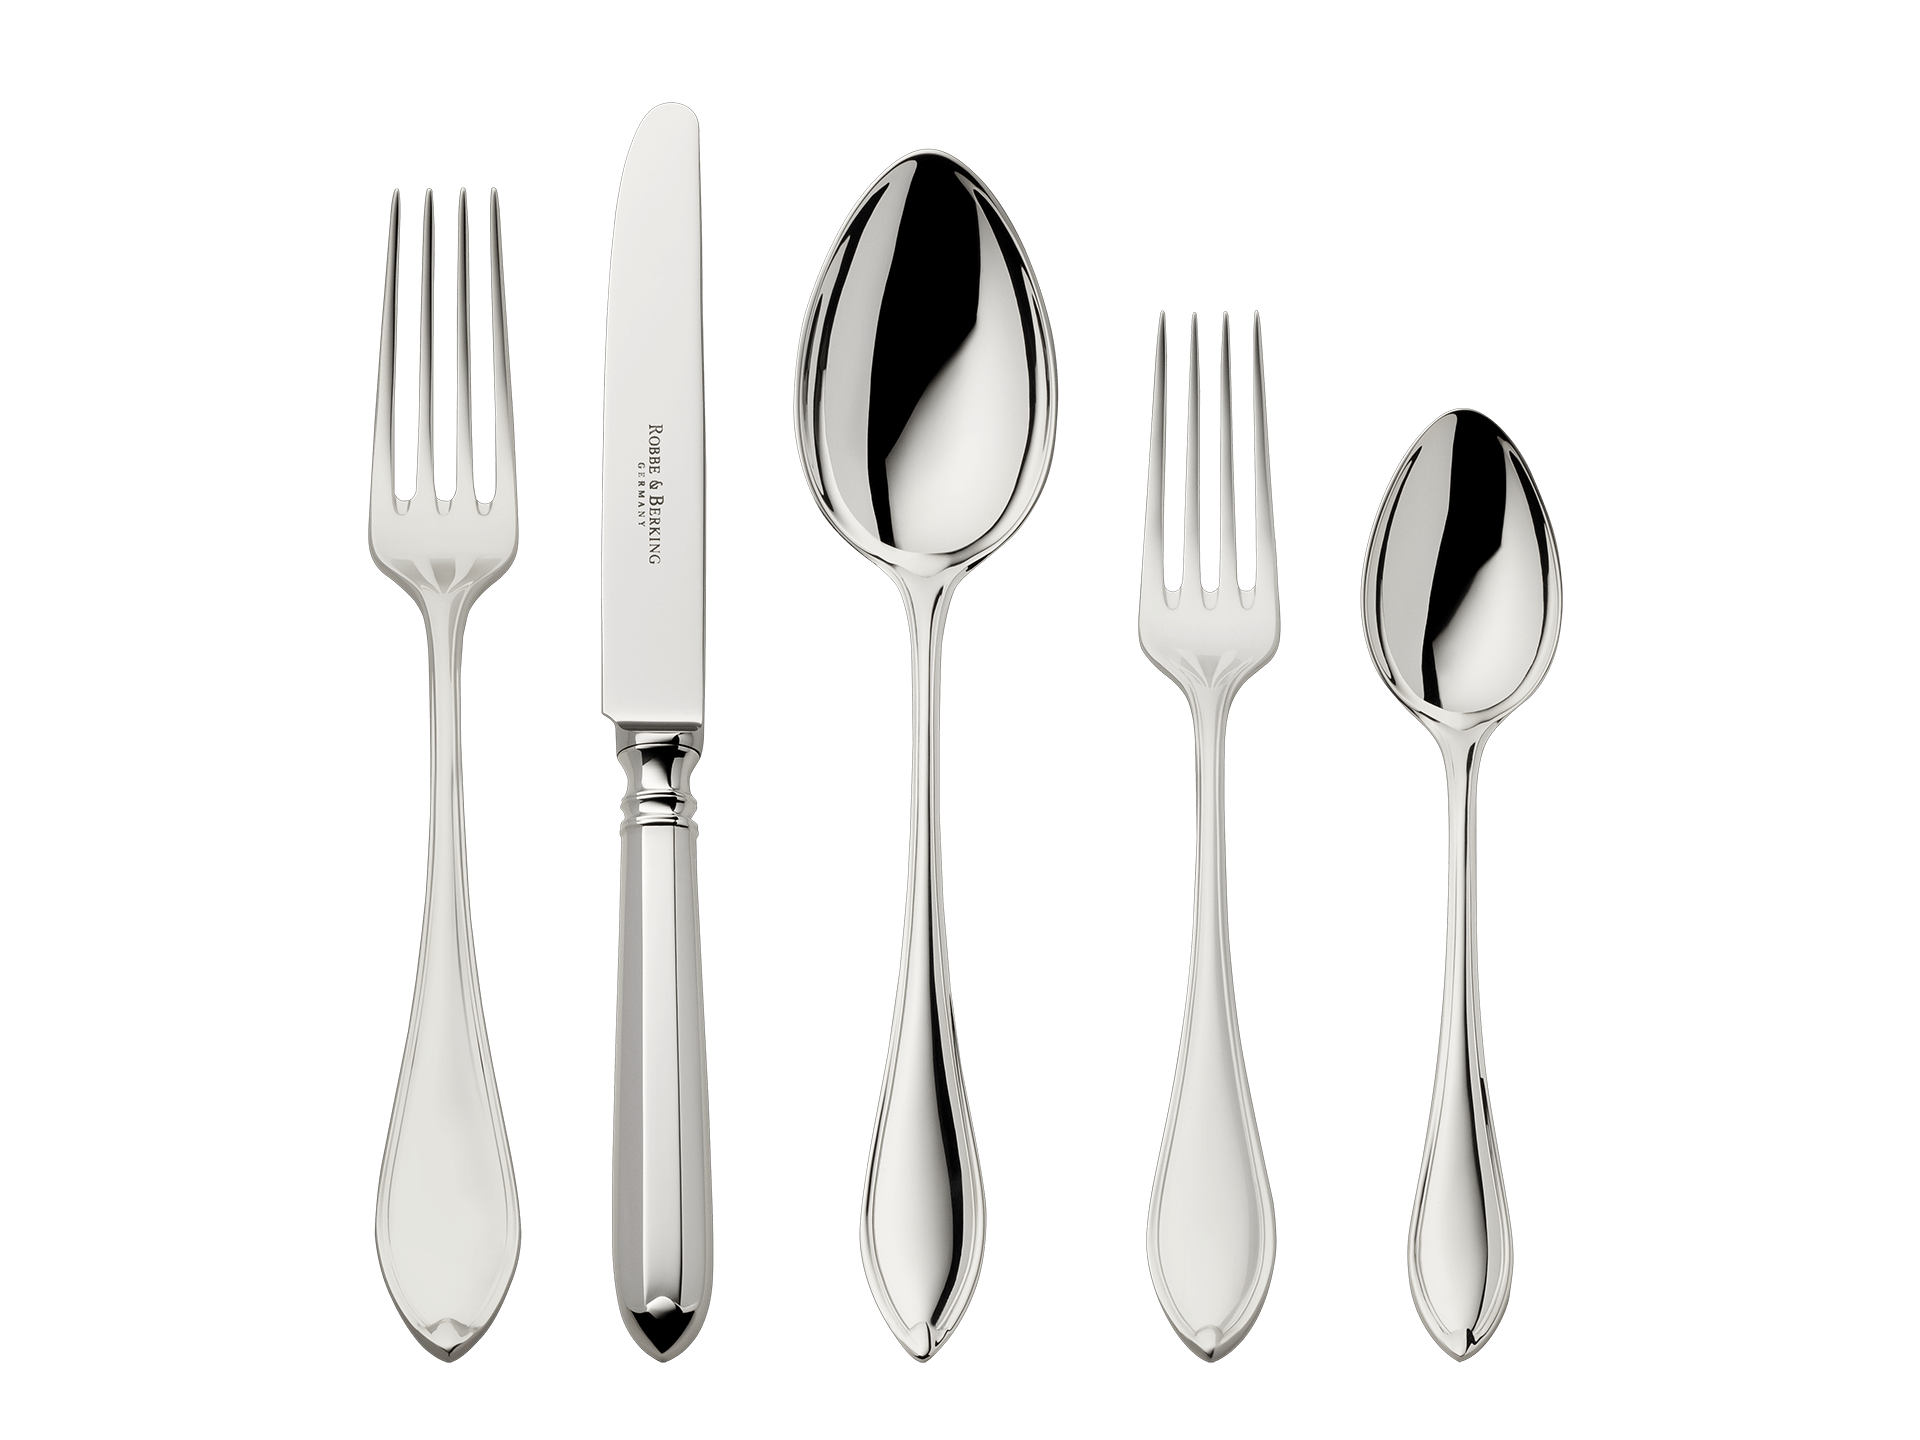 Navette 5-piece place setting (150g massive silverplated)